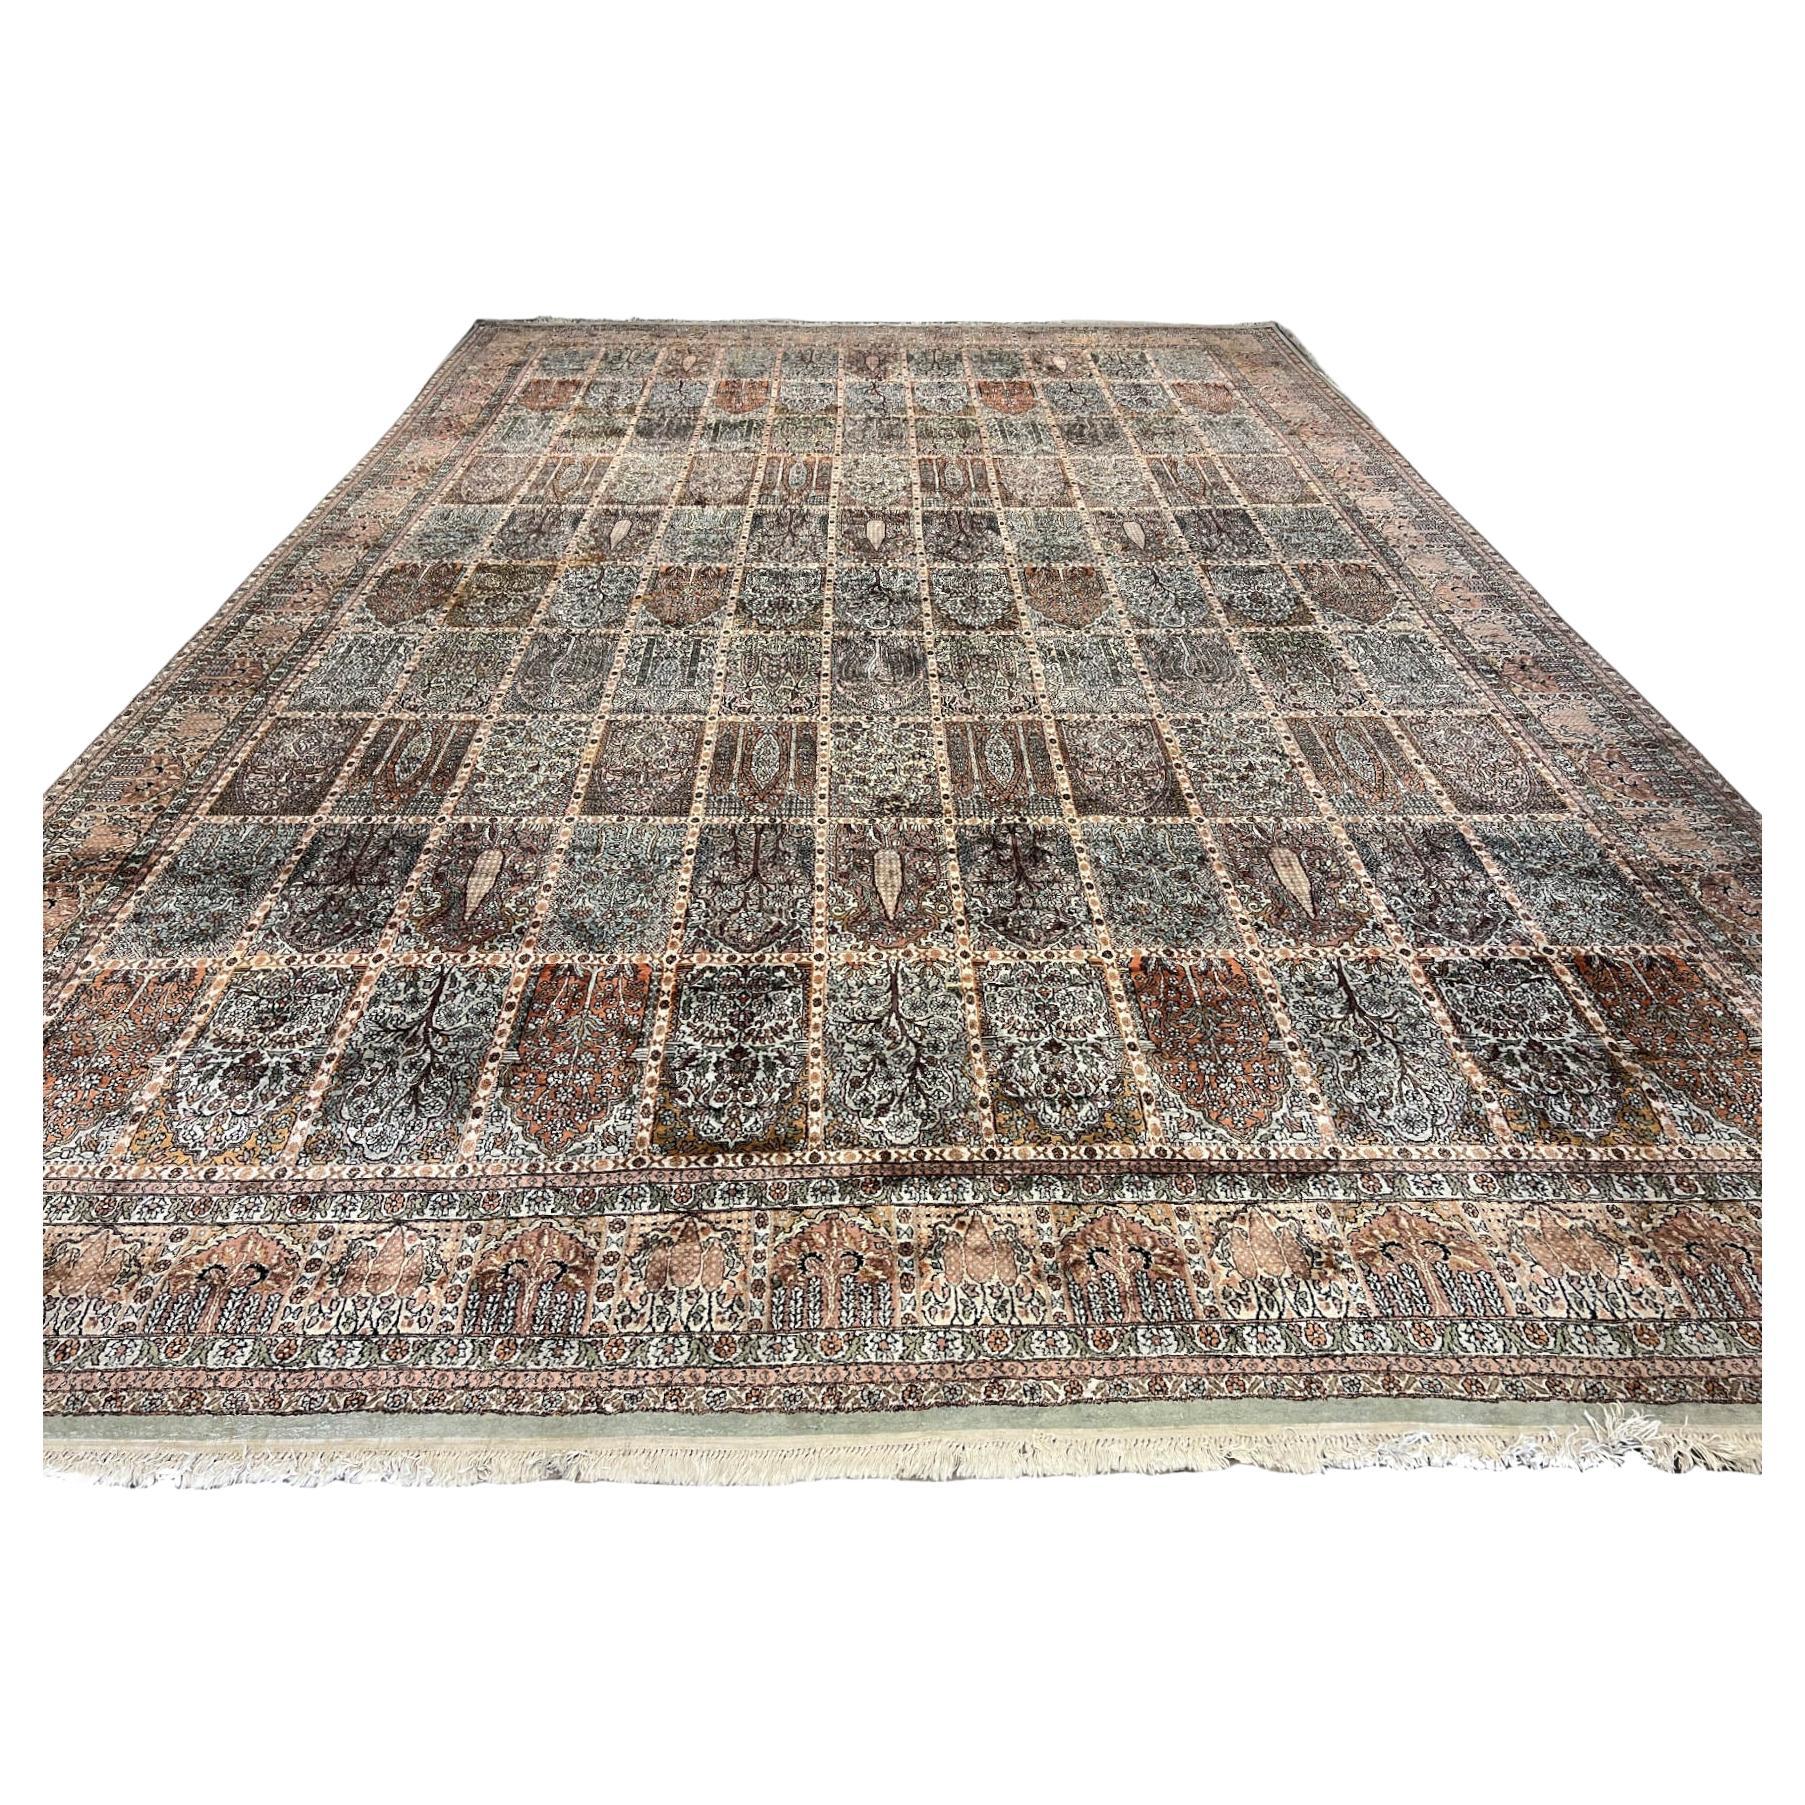 Hand-Knotted Kashmir Silk Pile Rug - 12' x 18' For Sale